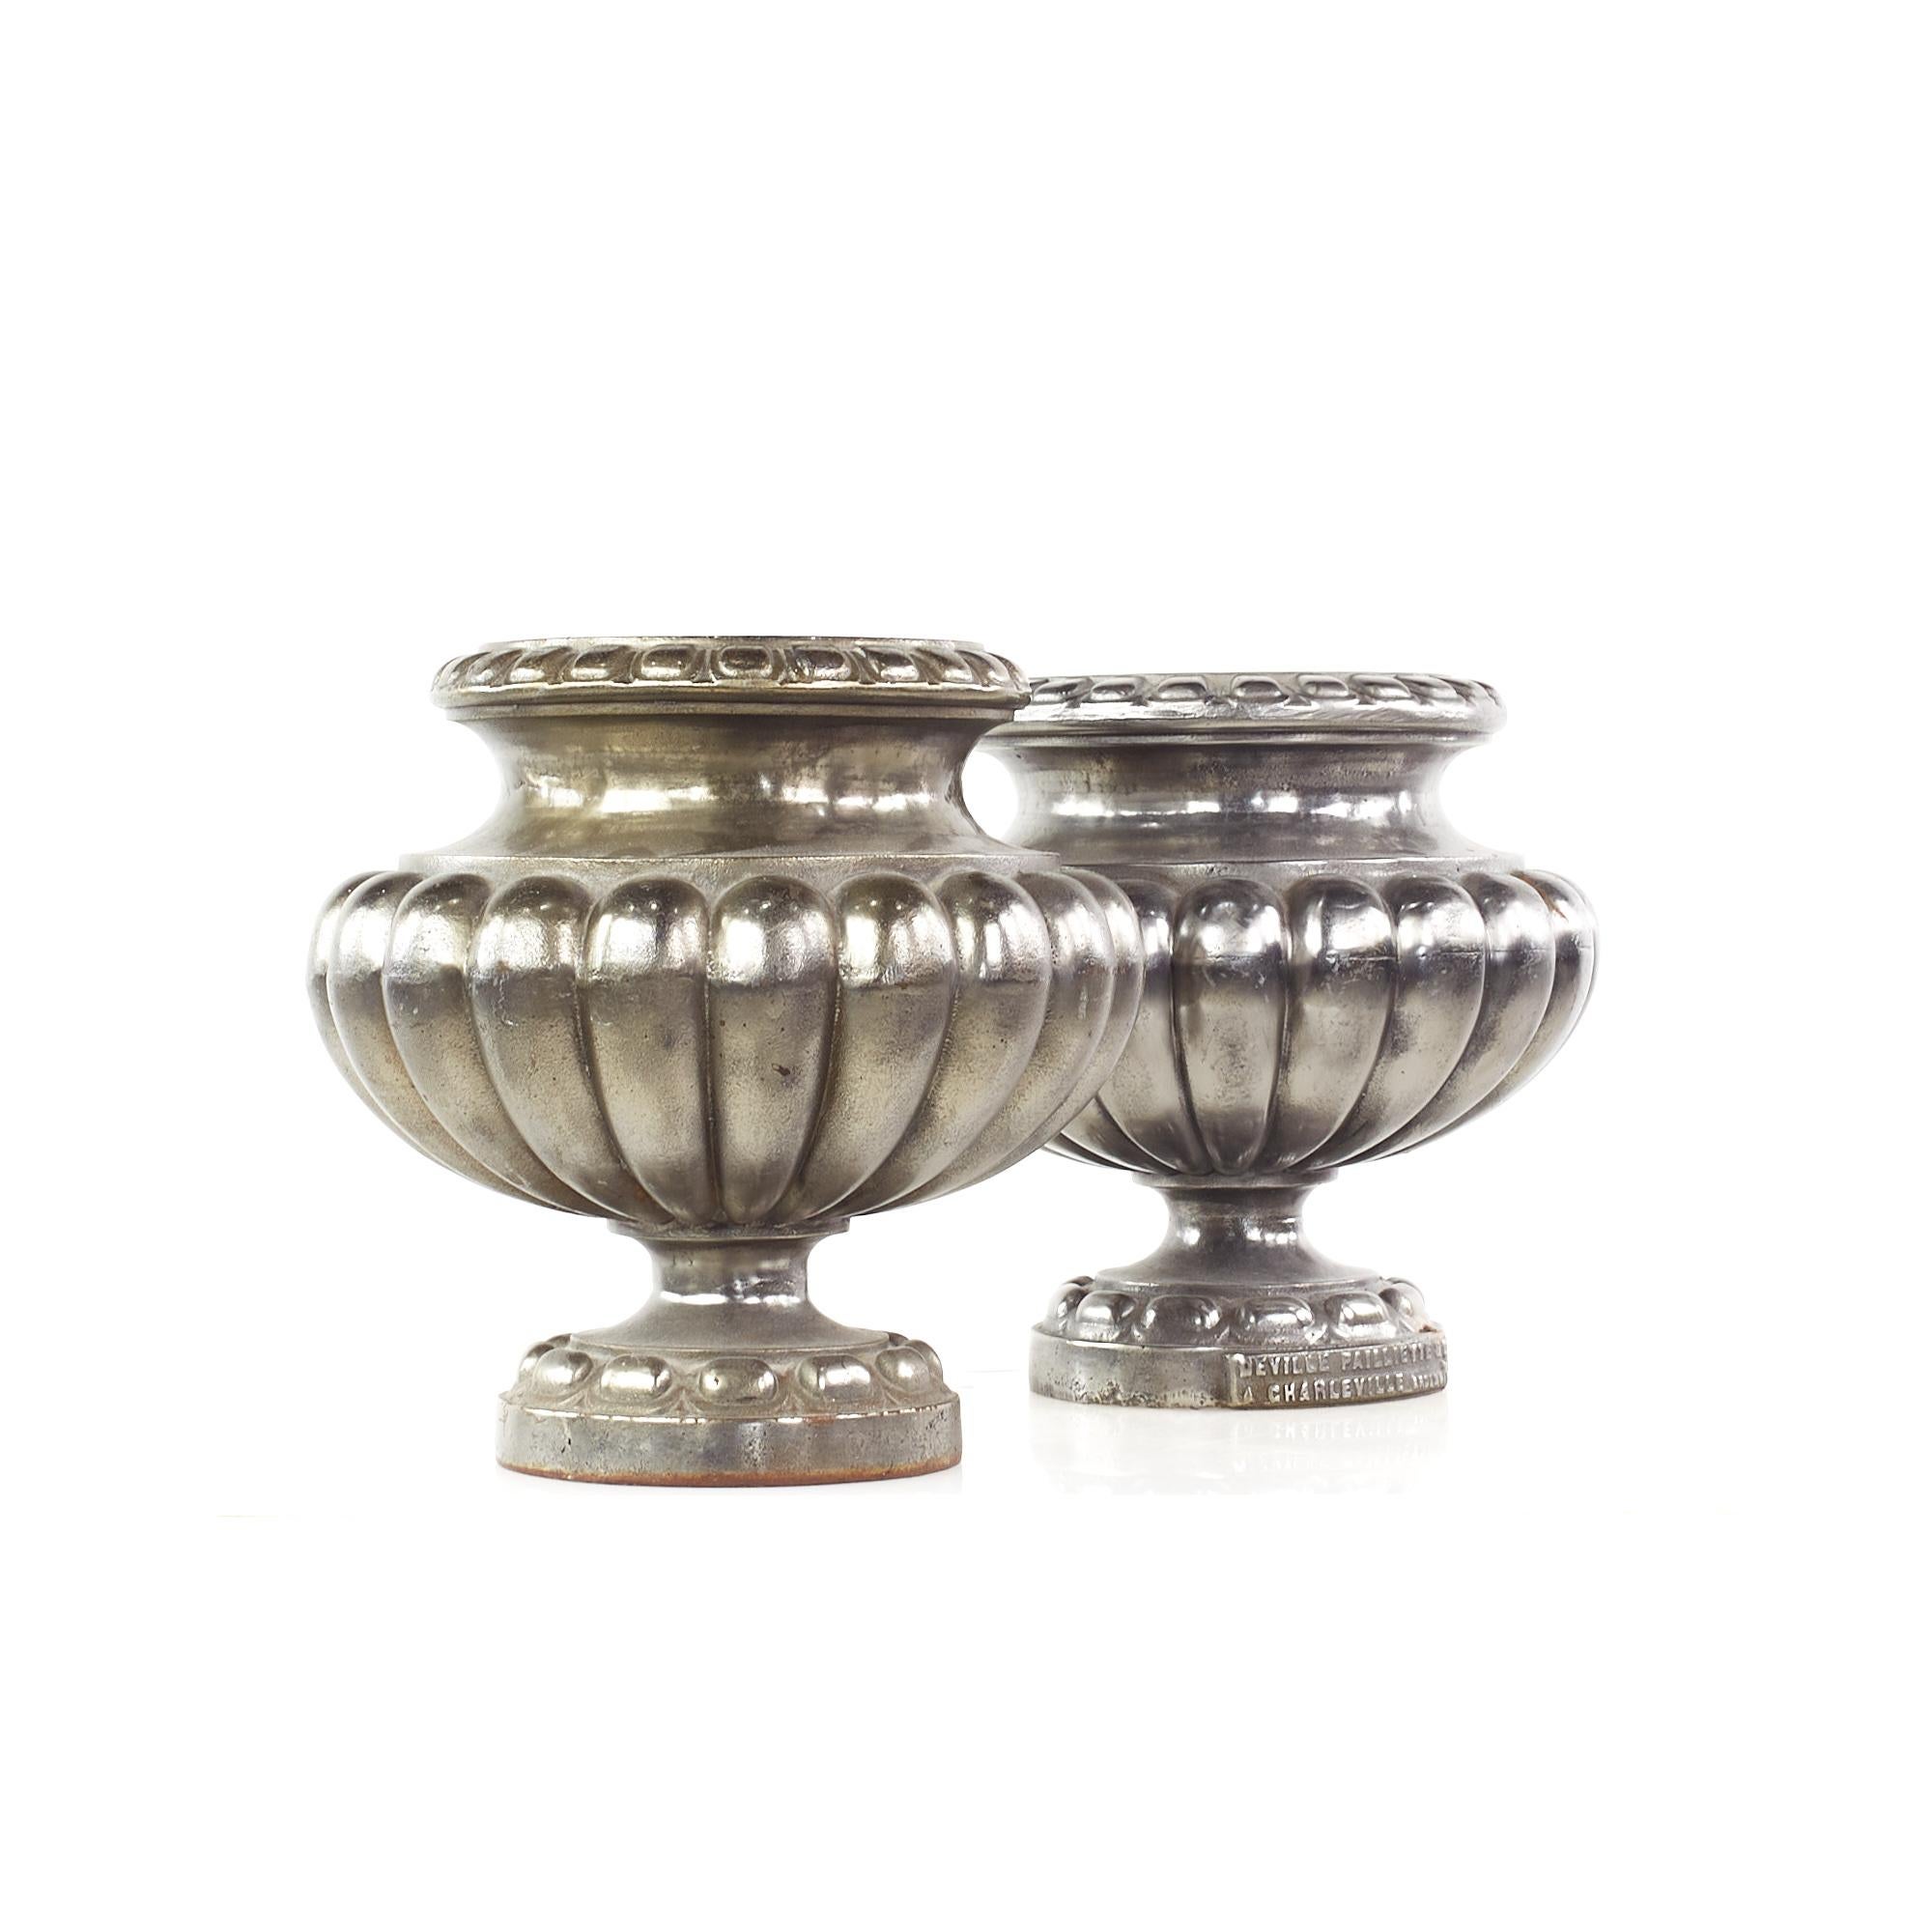 Vintage cast iron urn pots - pair.

Each urn measures: 11 wide x 11 deep x 11.5 inches high.

This set is in great Vintage condition with some rust spots in places.

We take our photos in a controlled lighting studio to show as much detail as